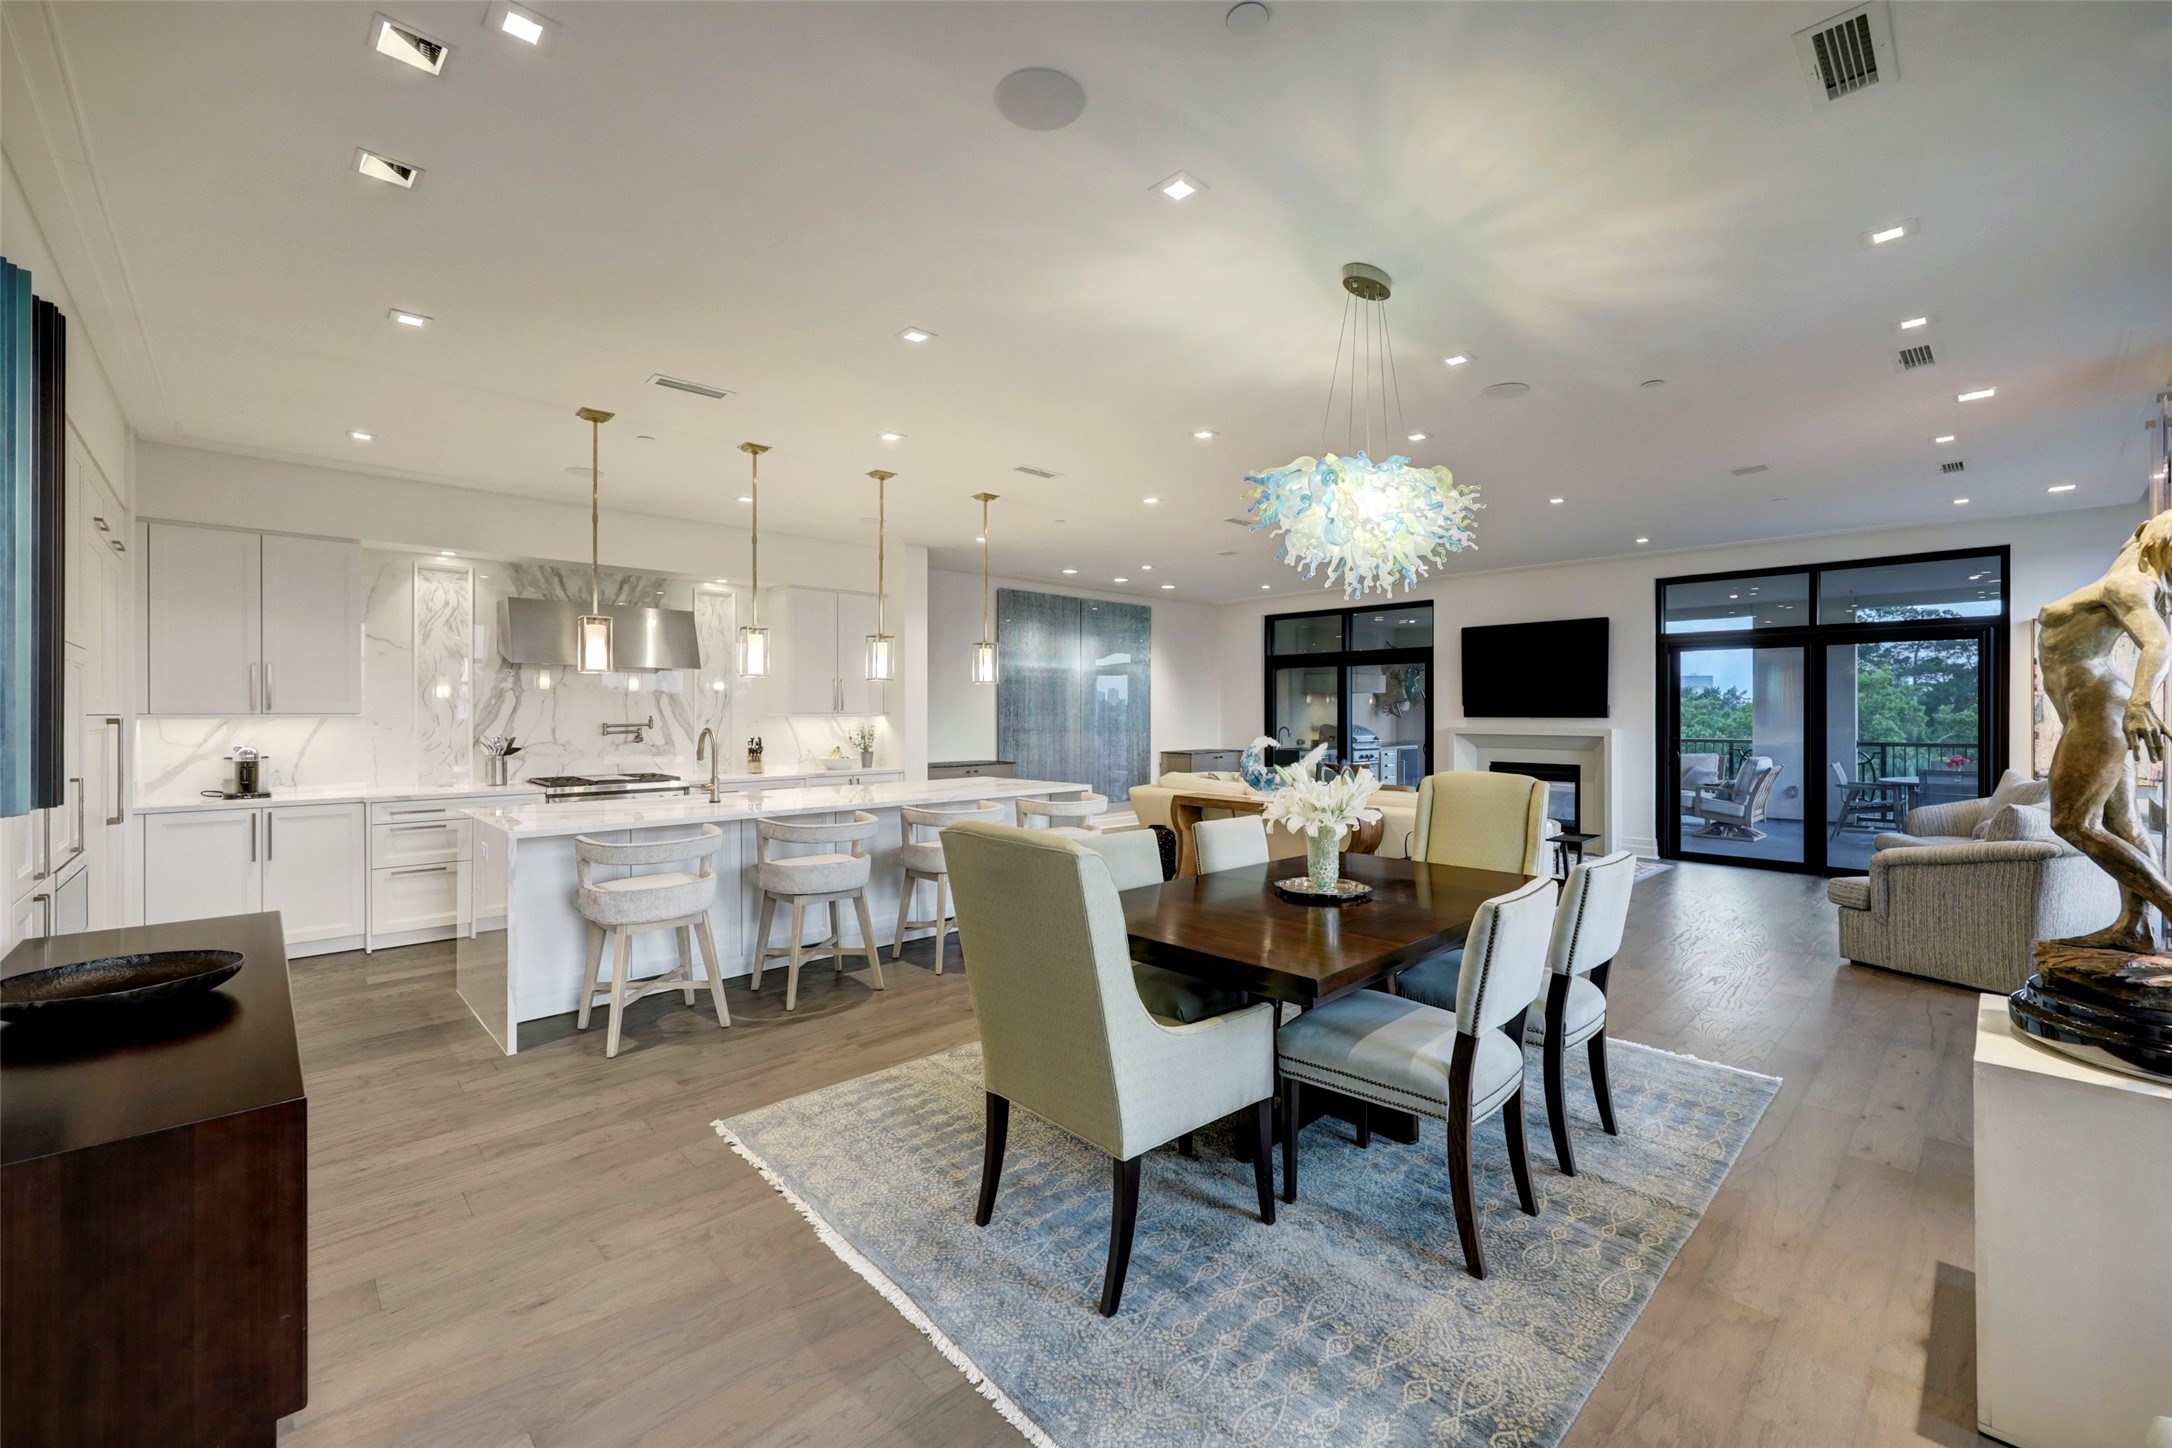 With the open floor plan the Dining Room can be as large or as intimate as you would like it to be.